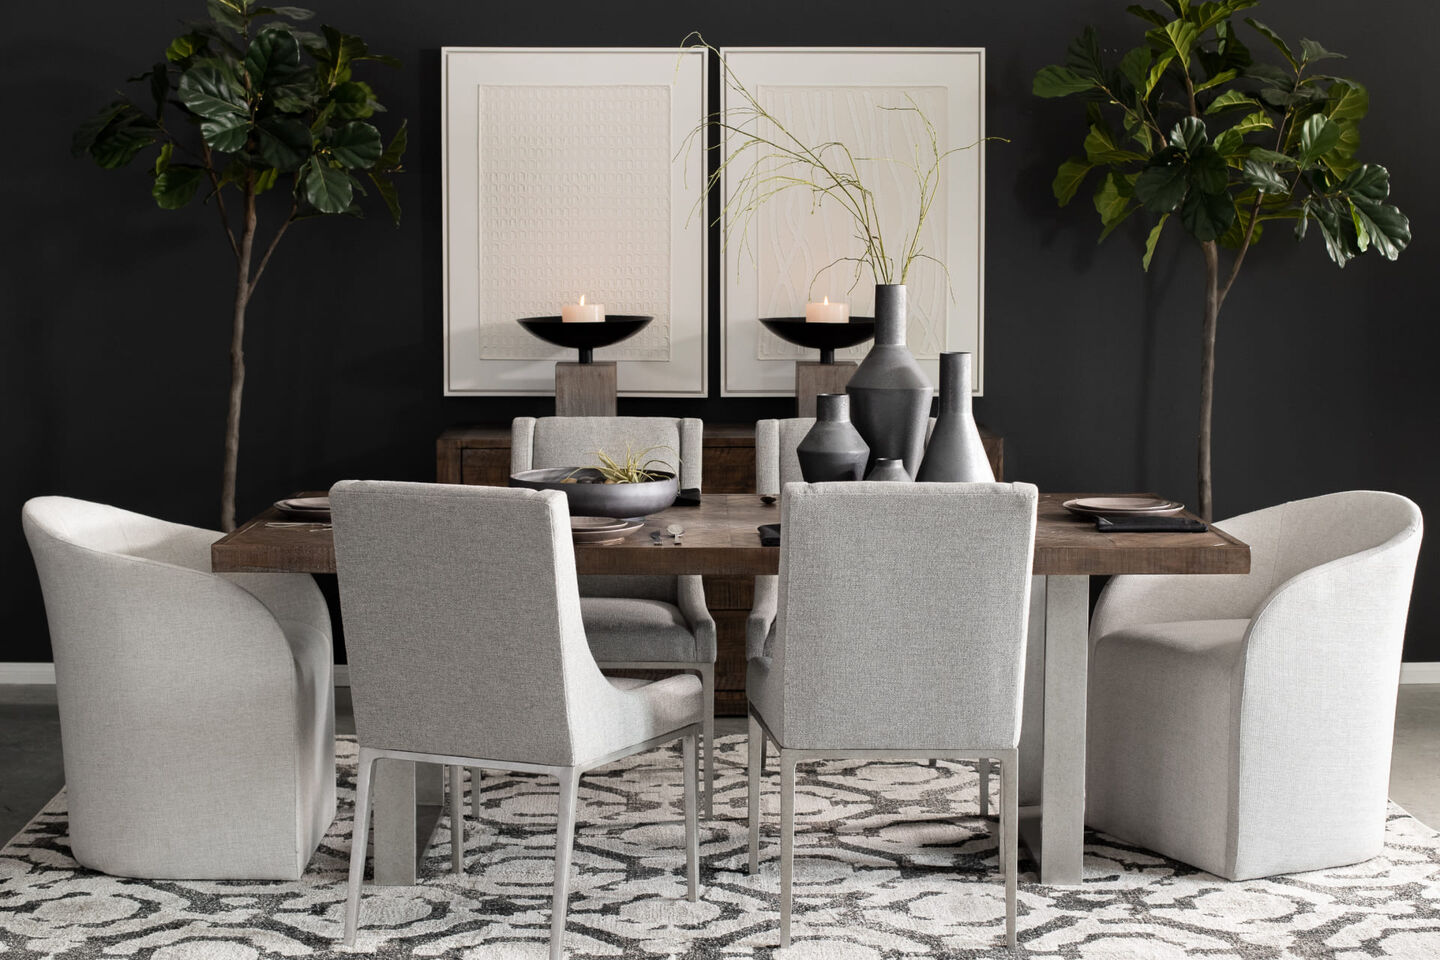 Bernhardt Draper Dining Table with Neutral Upholstered Dining Chairs in Modern Moody Dining Room